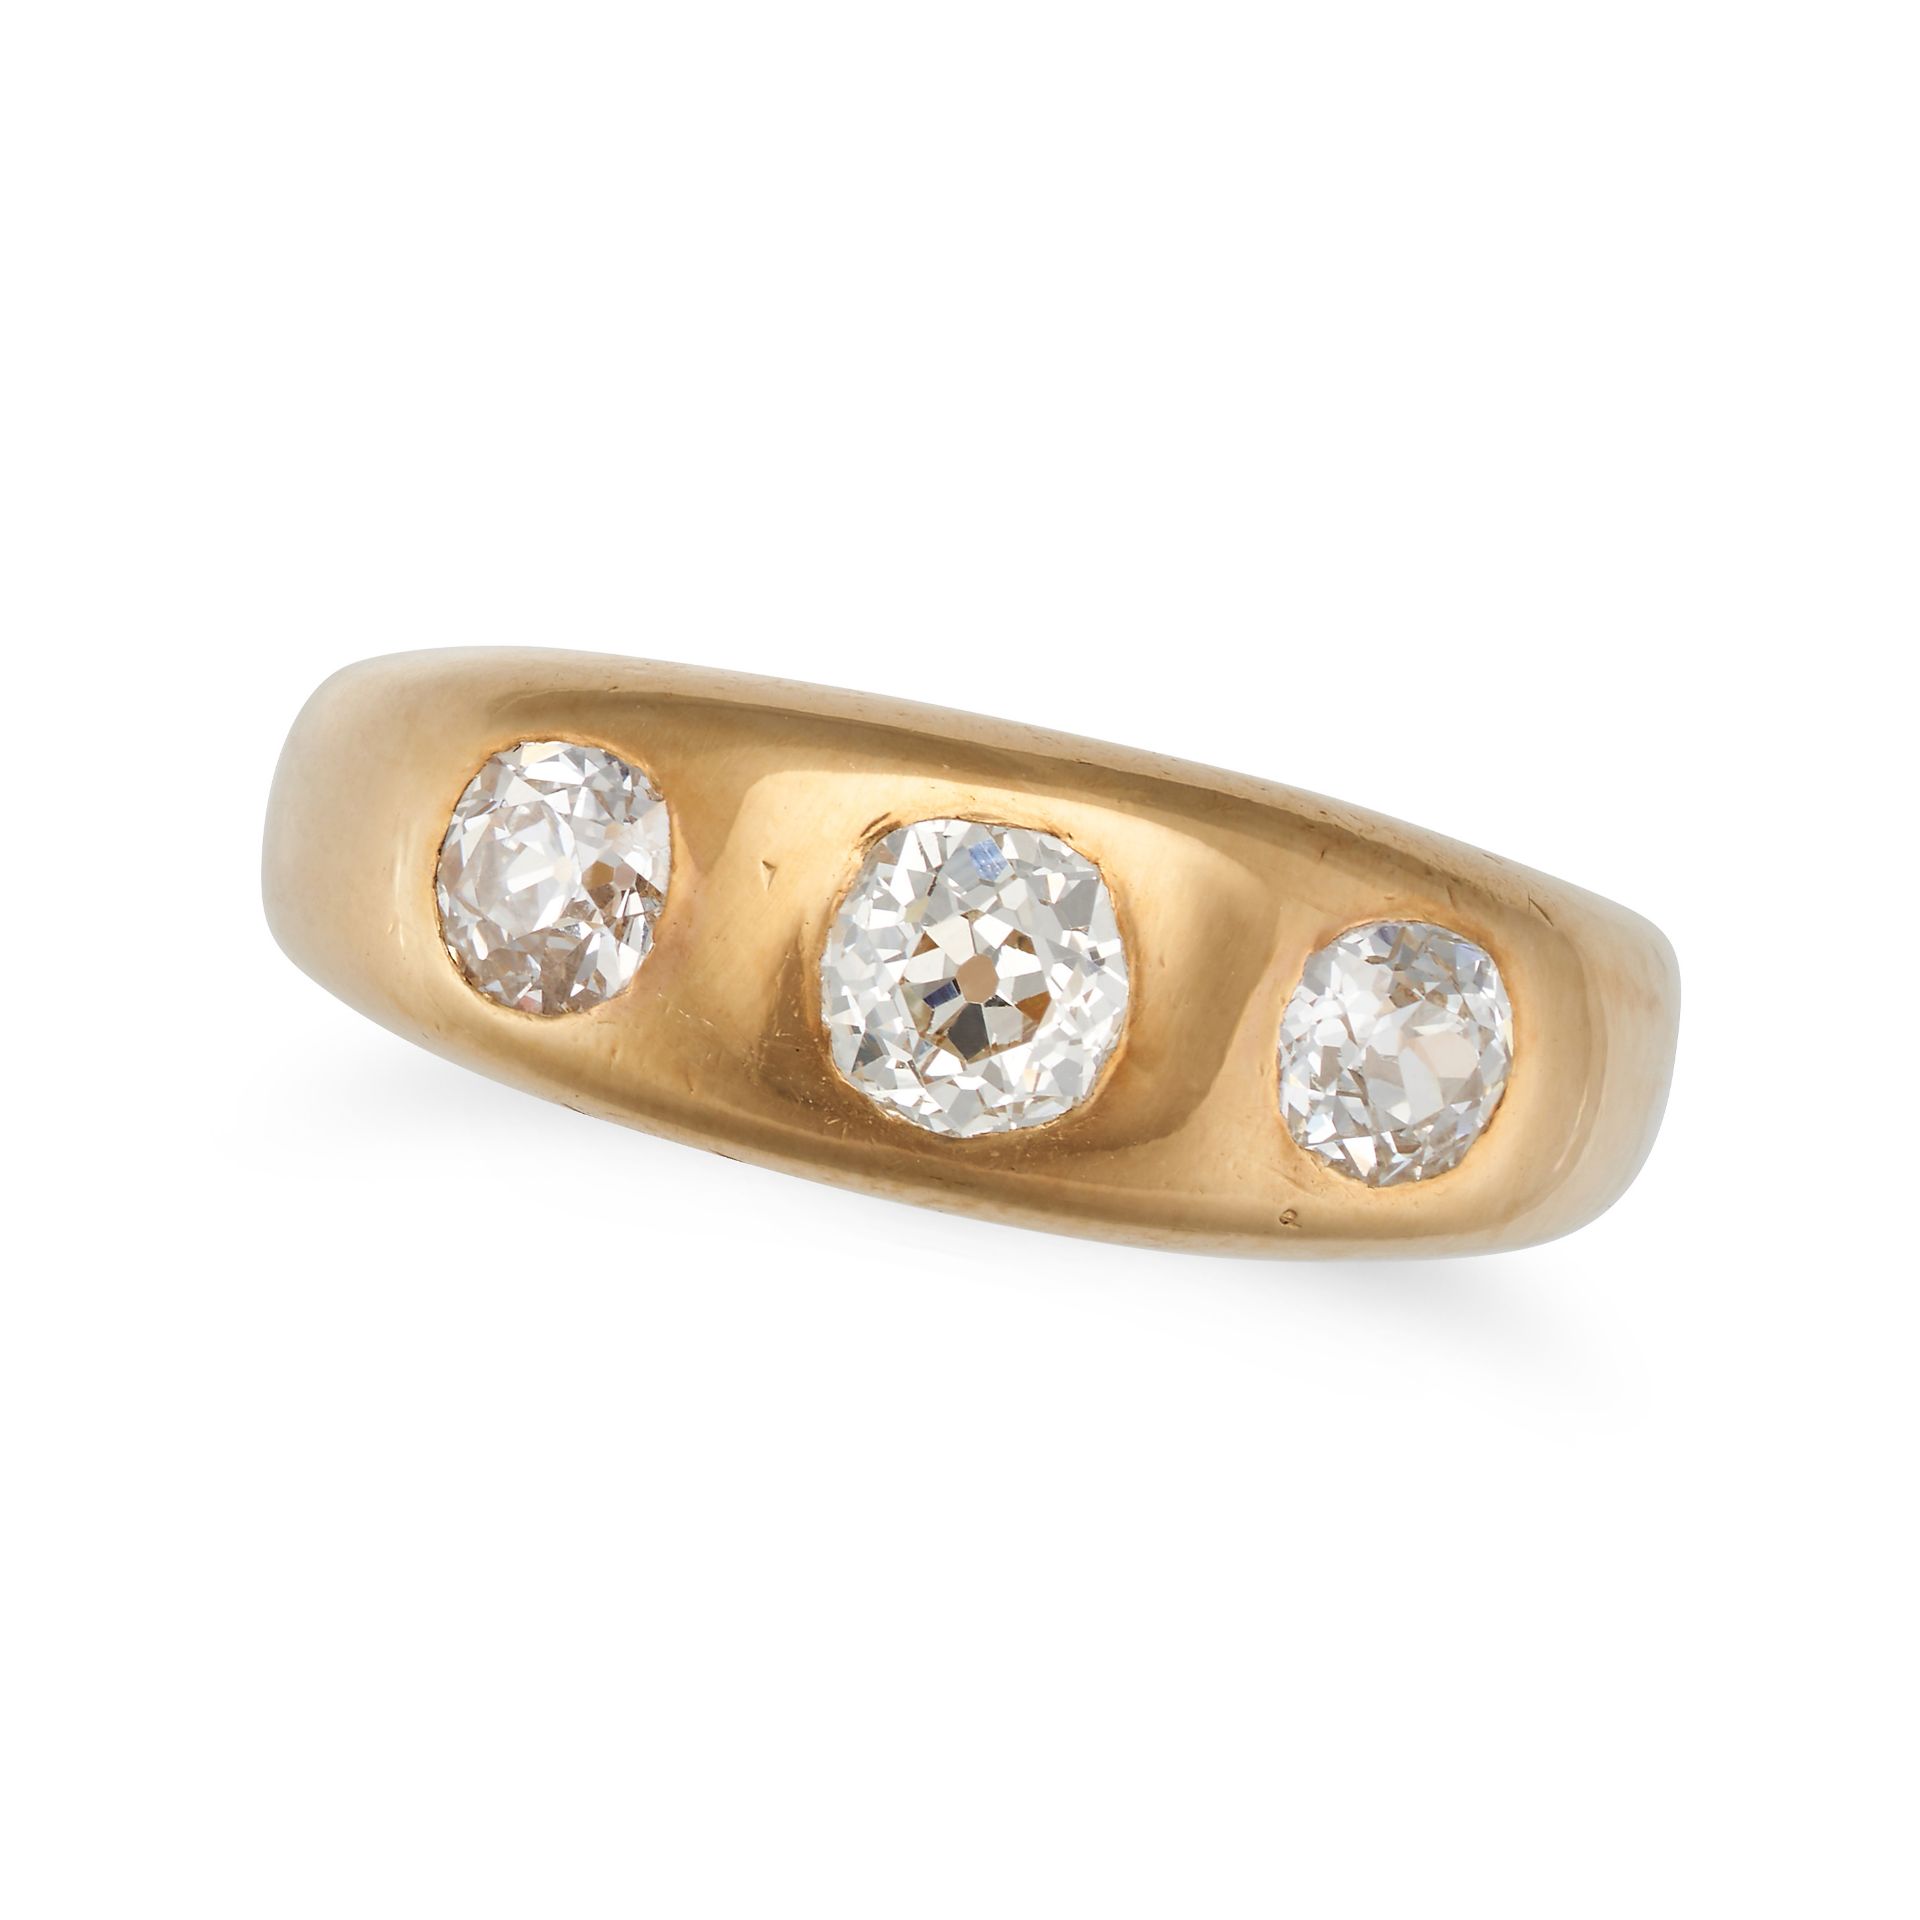 A THREE STONE DIAMOND GYPSY RING, in 18ct yellow gold, set with three old cut diamonds, stamped 1...